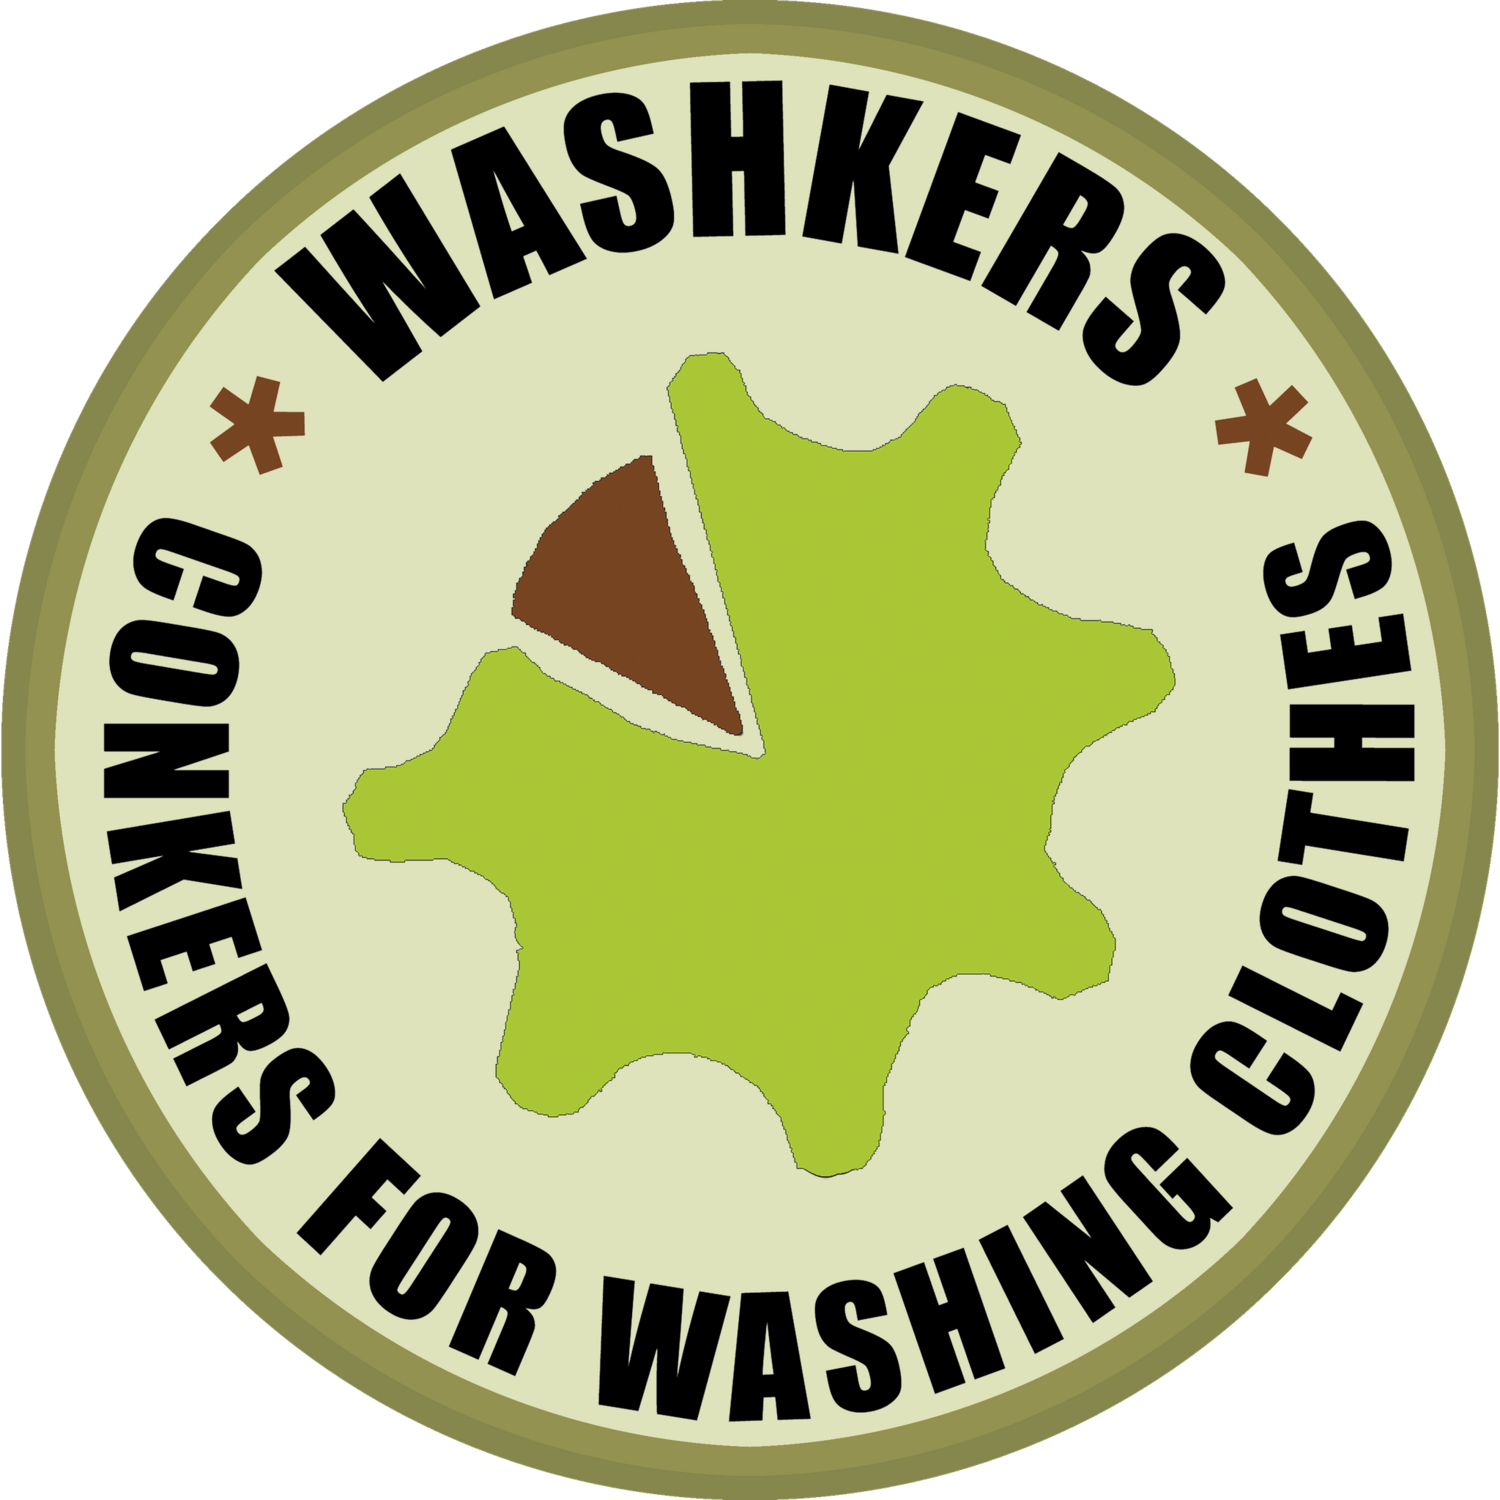 Washkers - conkers for washing your clothes